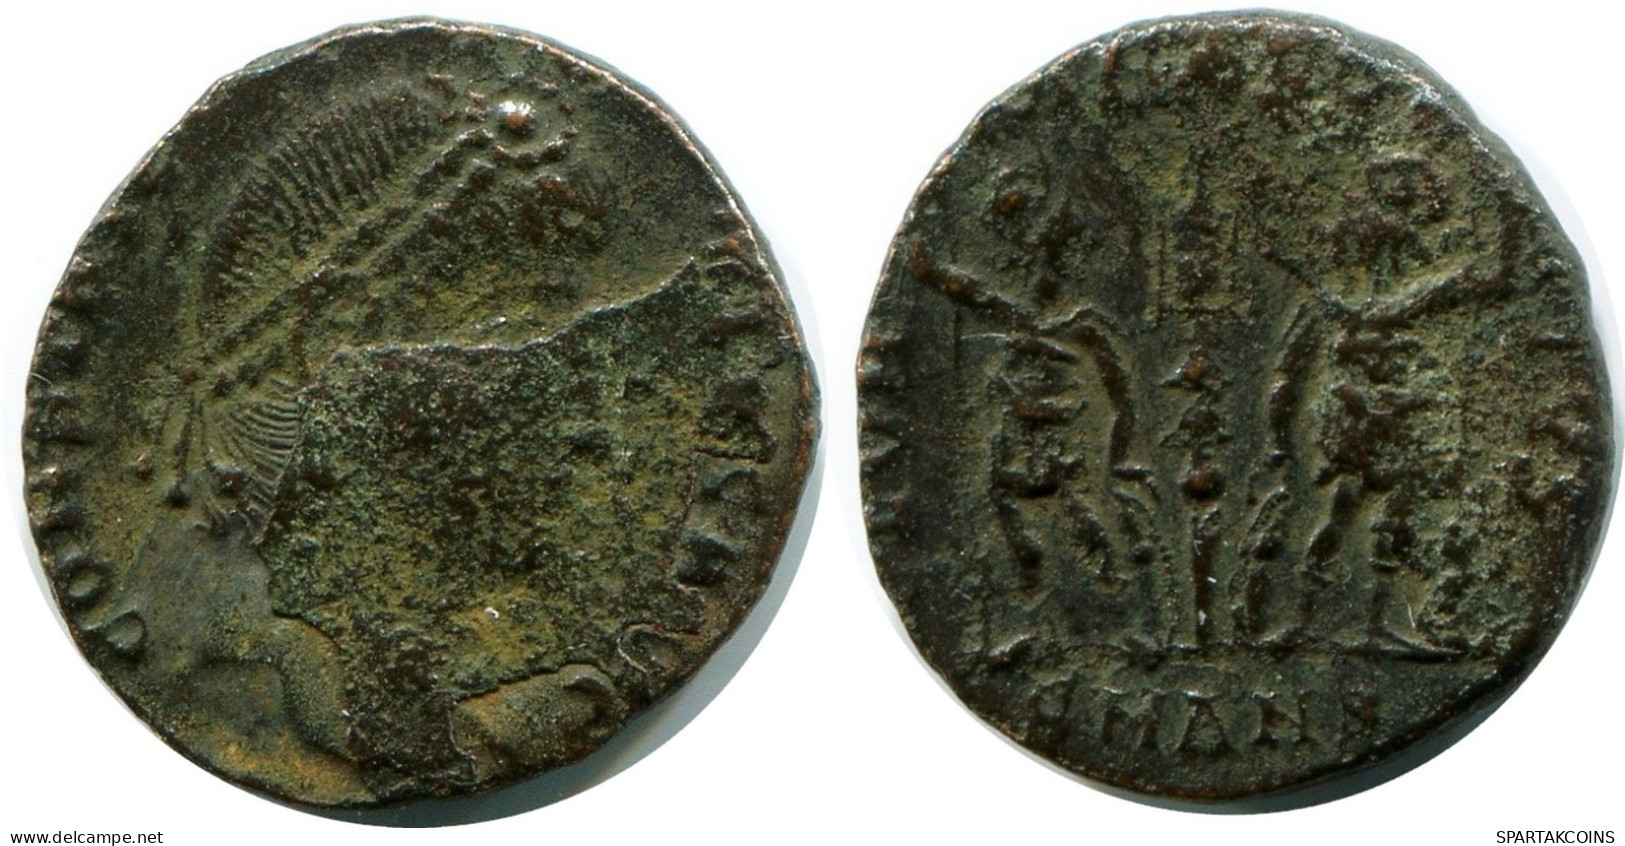 ROMAN Moneda MINTED IN ANTIOCH FROM THE ROYAL ONTARIO MUSEUM #ANC11283.14.E.A - The Christian Empire (307 AD To 363 AD)